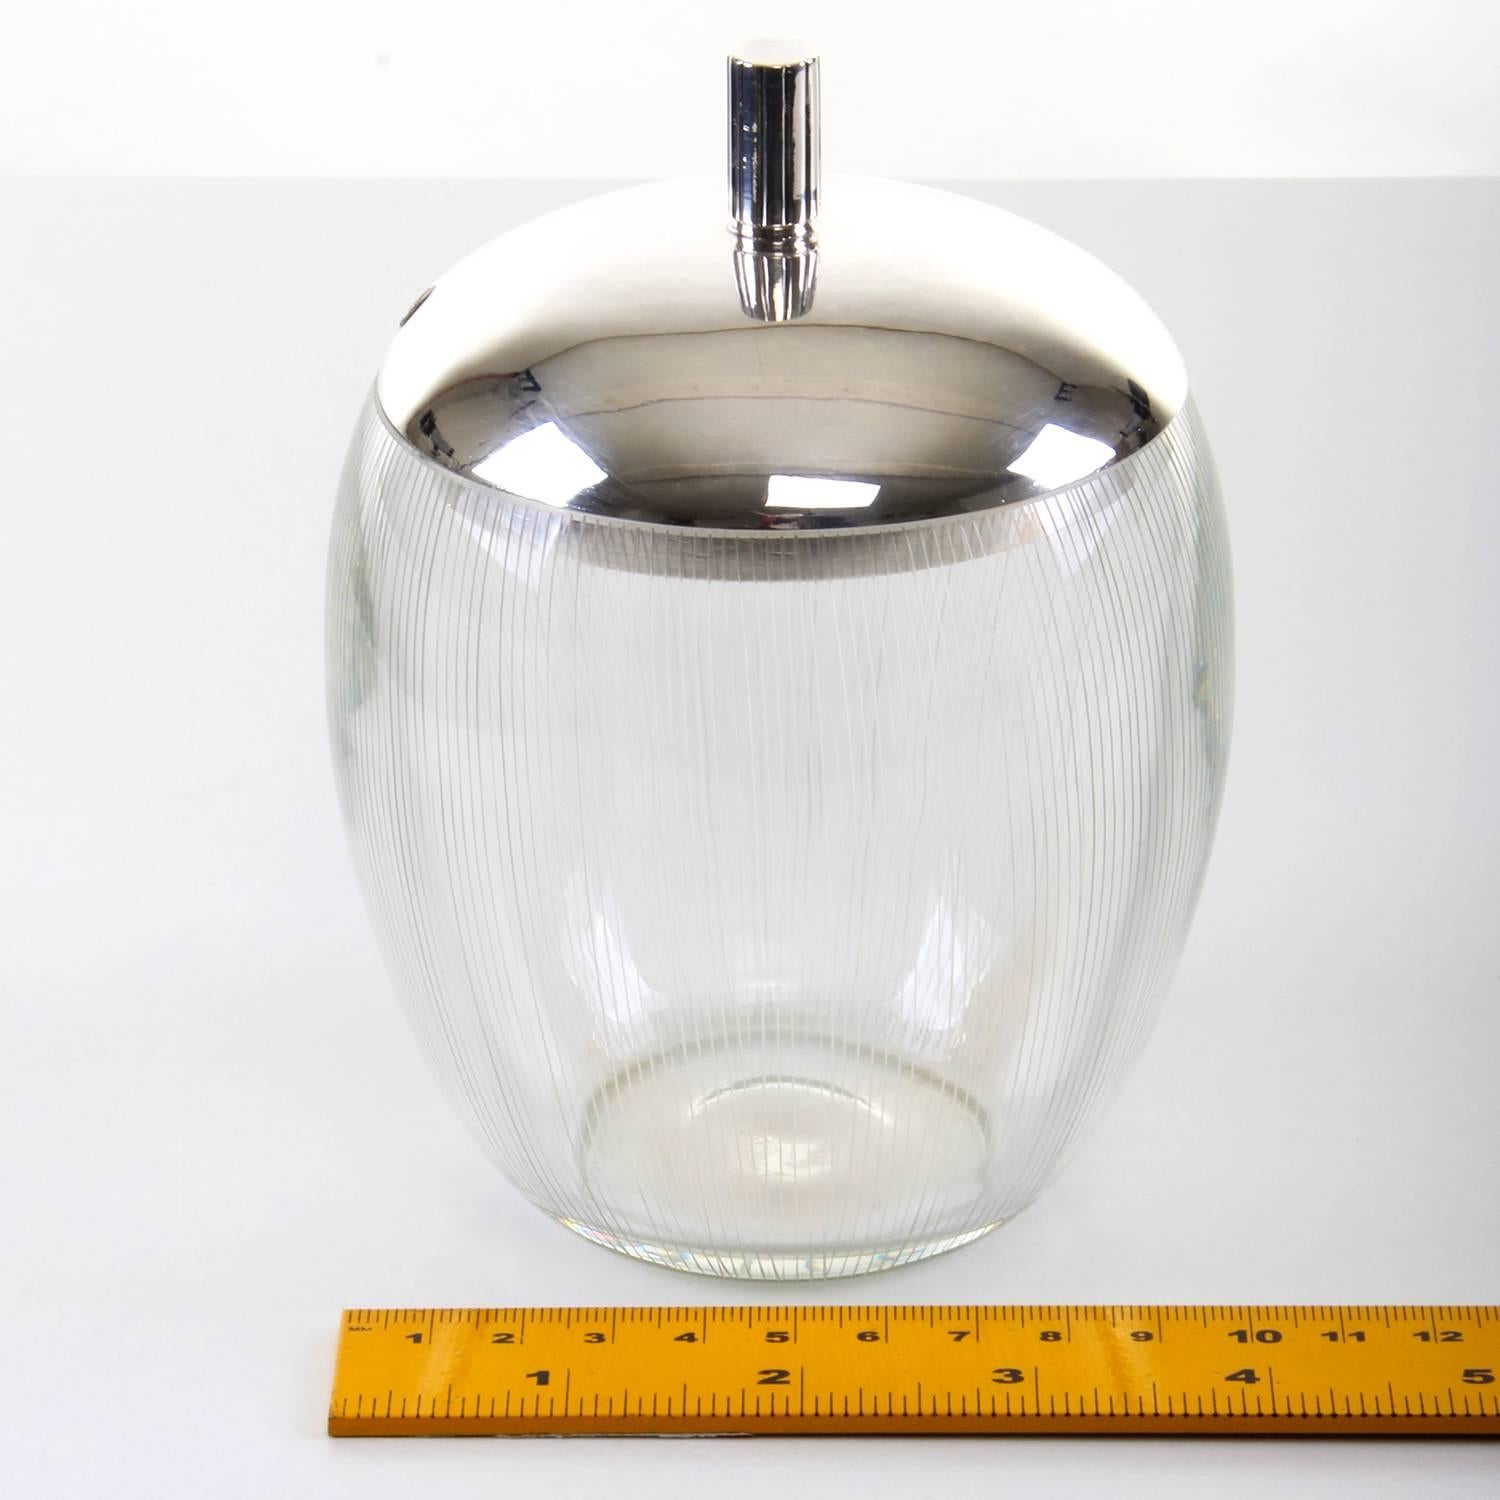 Marmalade Jar, Blown Glass and Sterling Silver by E. Dragsted & Holmgaard, 1951 For Sale 4